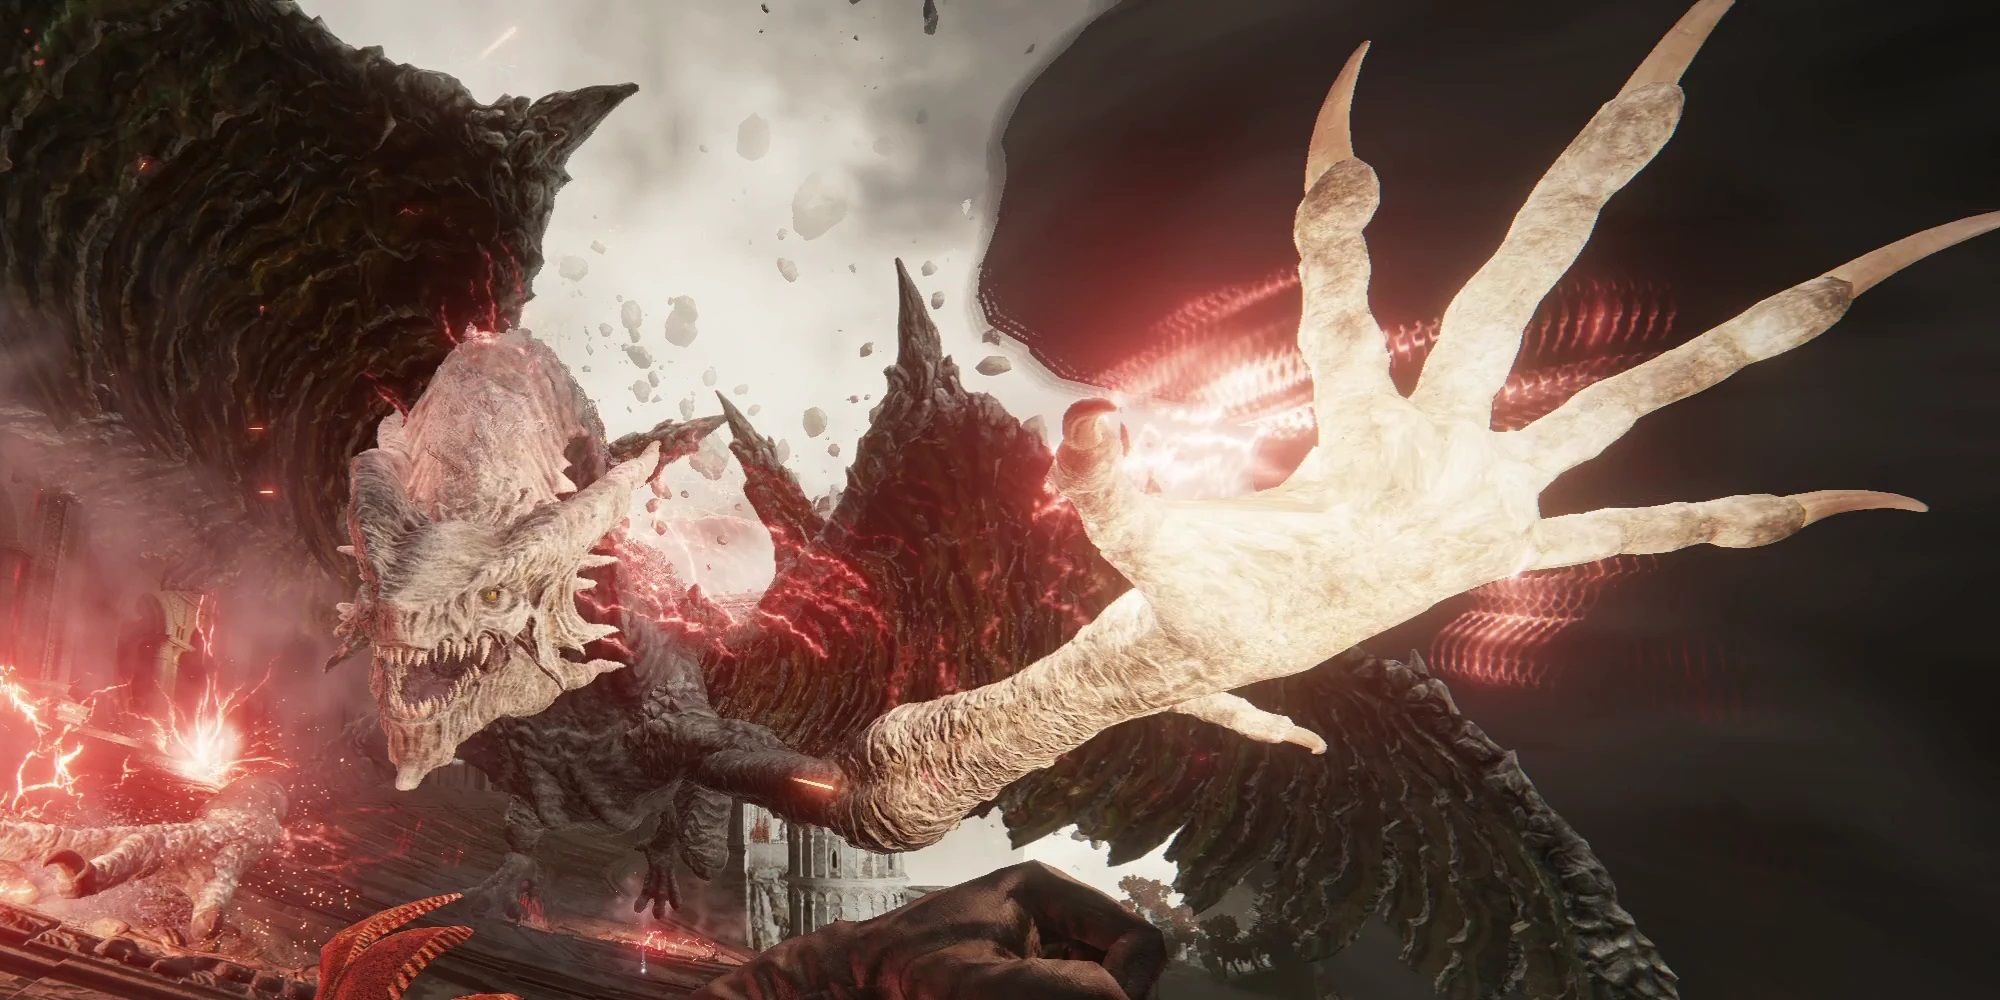 A tarnished warrior fights a Dragon boss from a first-person perspective